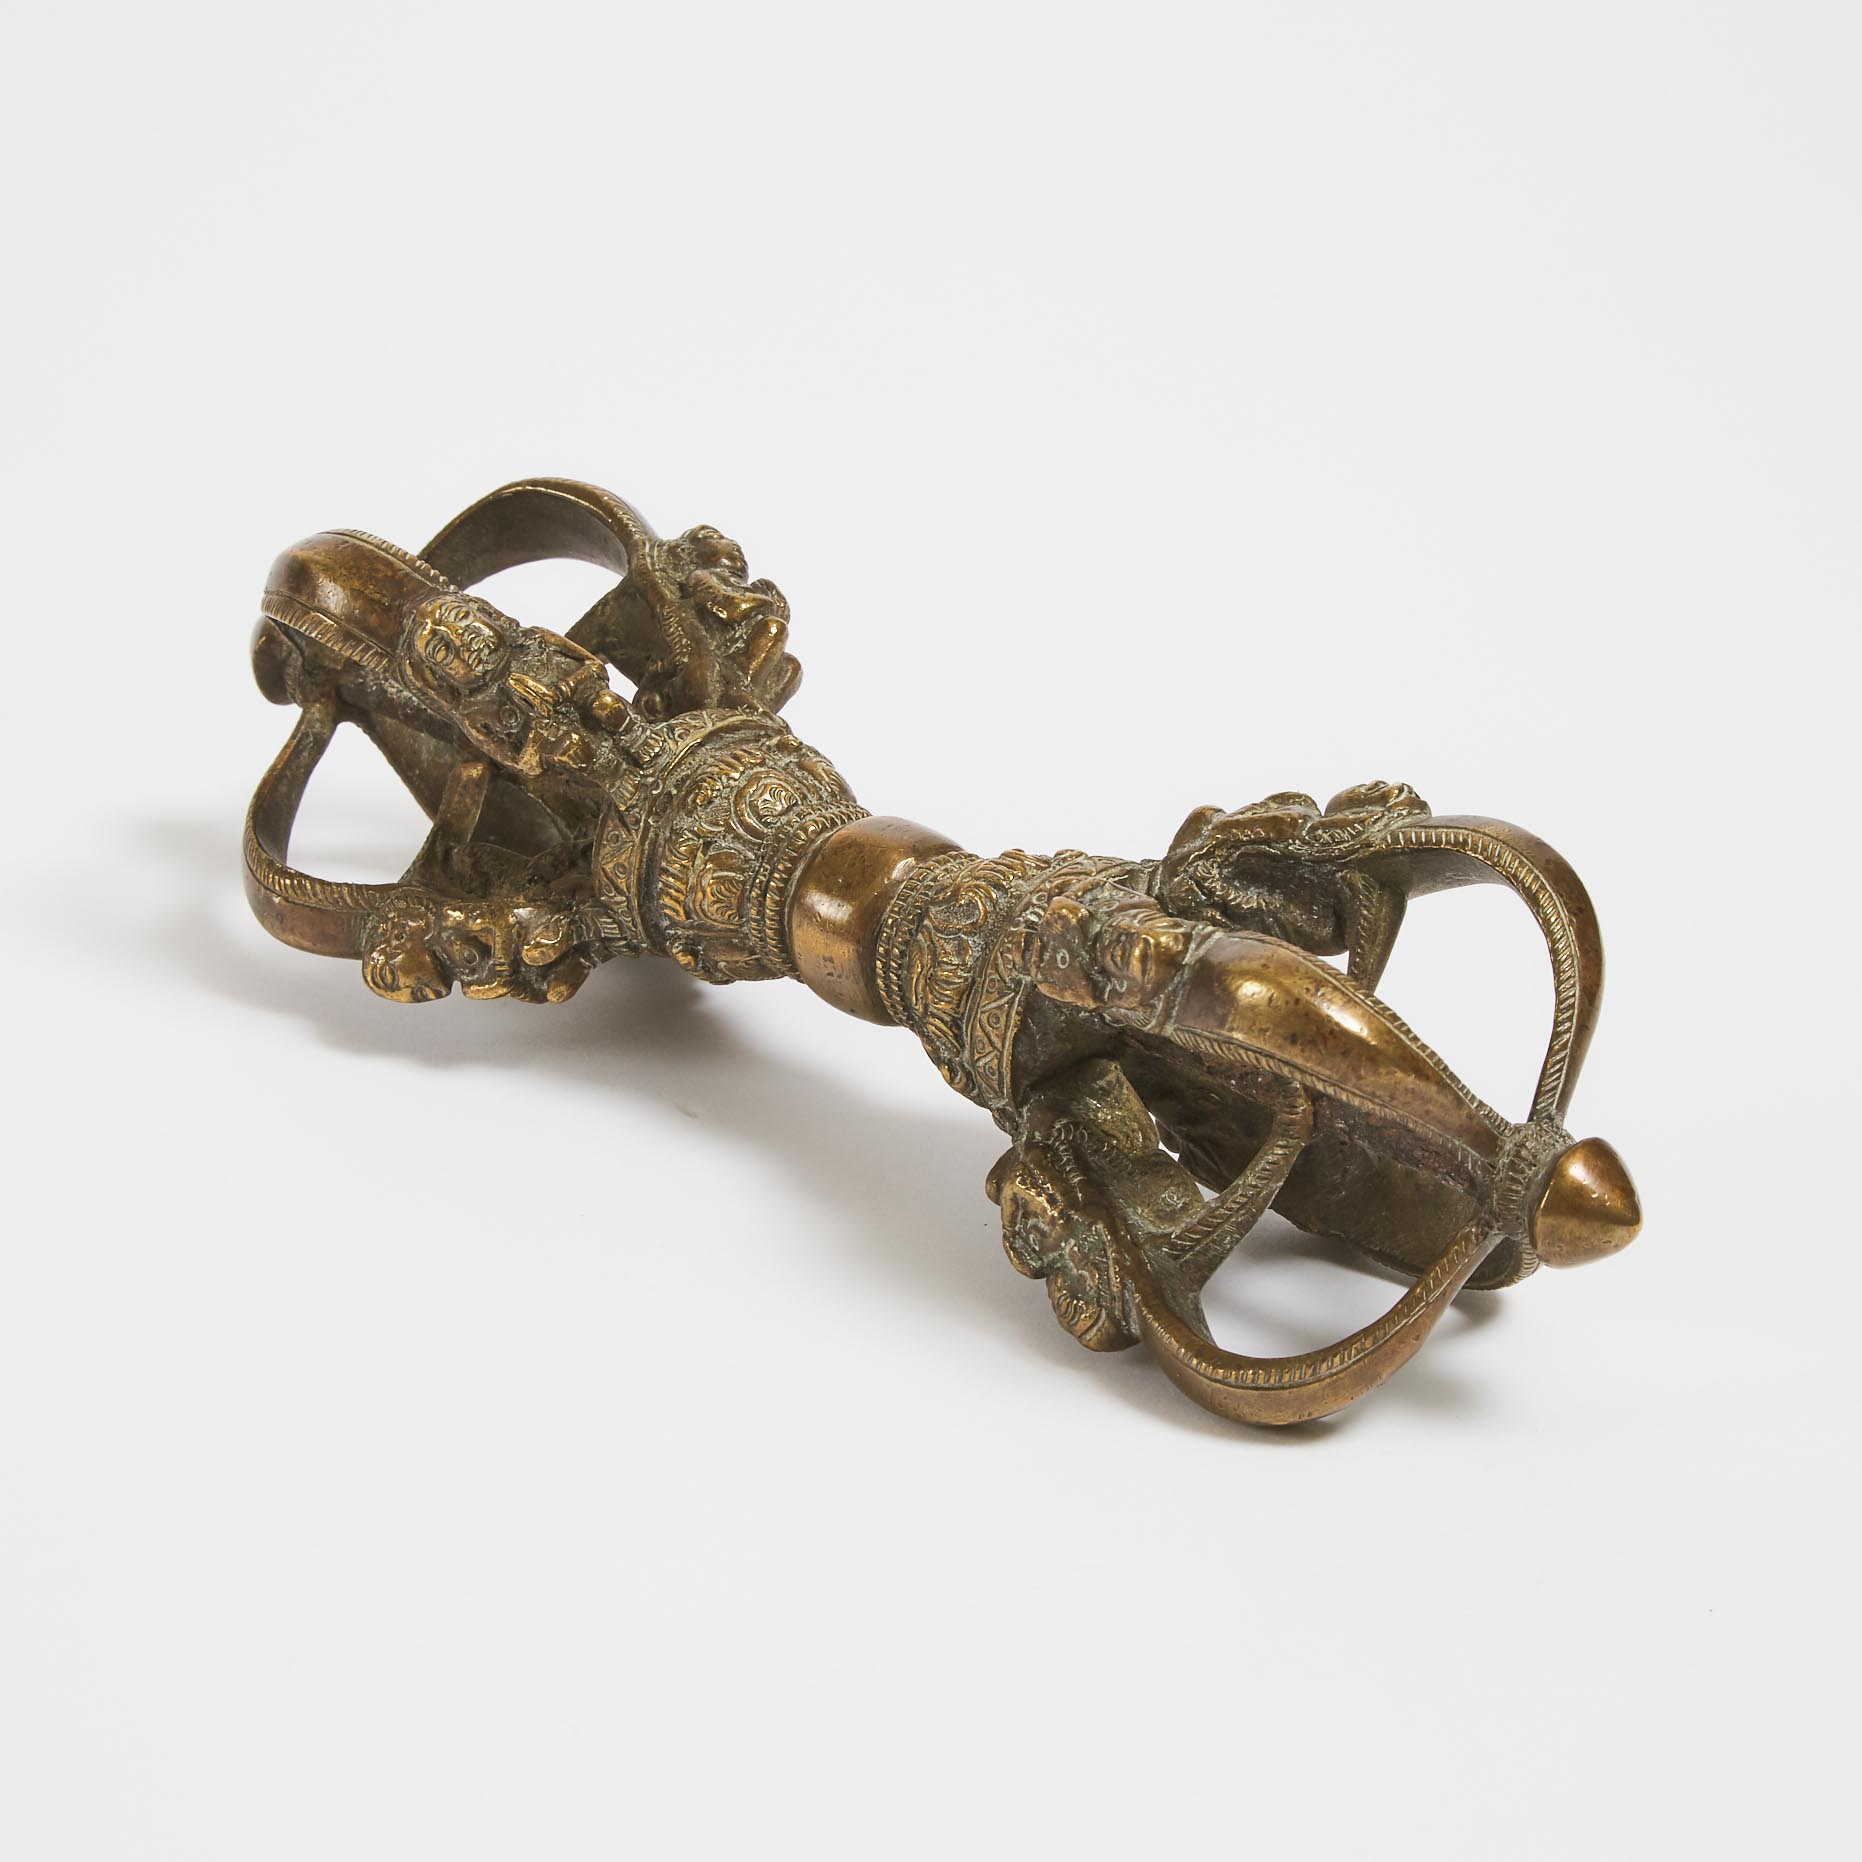 A Bronze and Iron Vajra, Tibet, 15th Century or Later